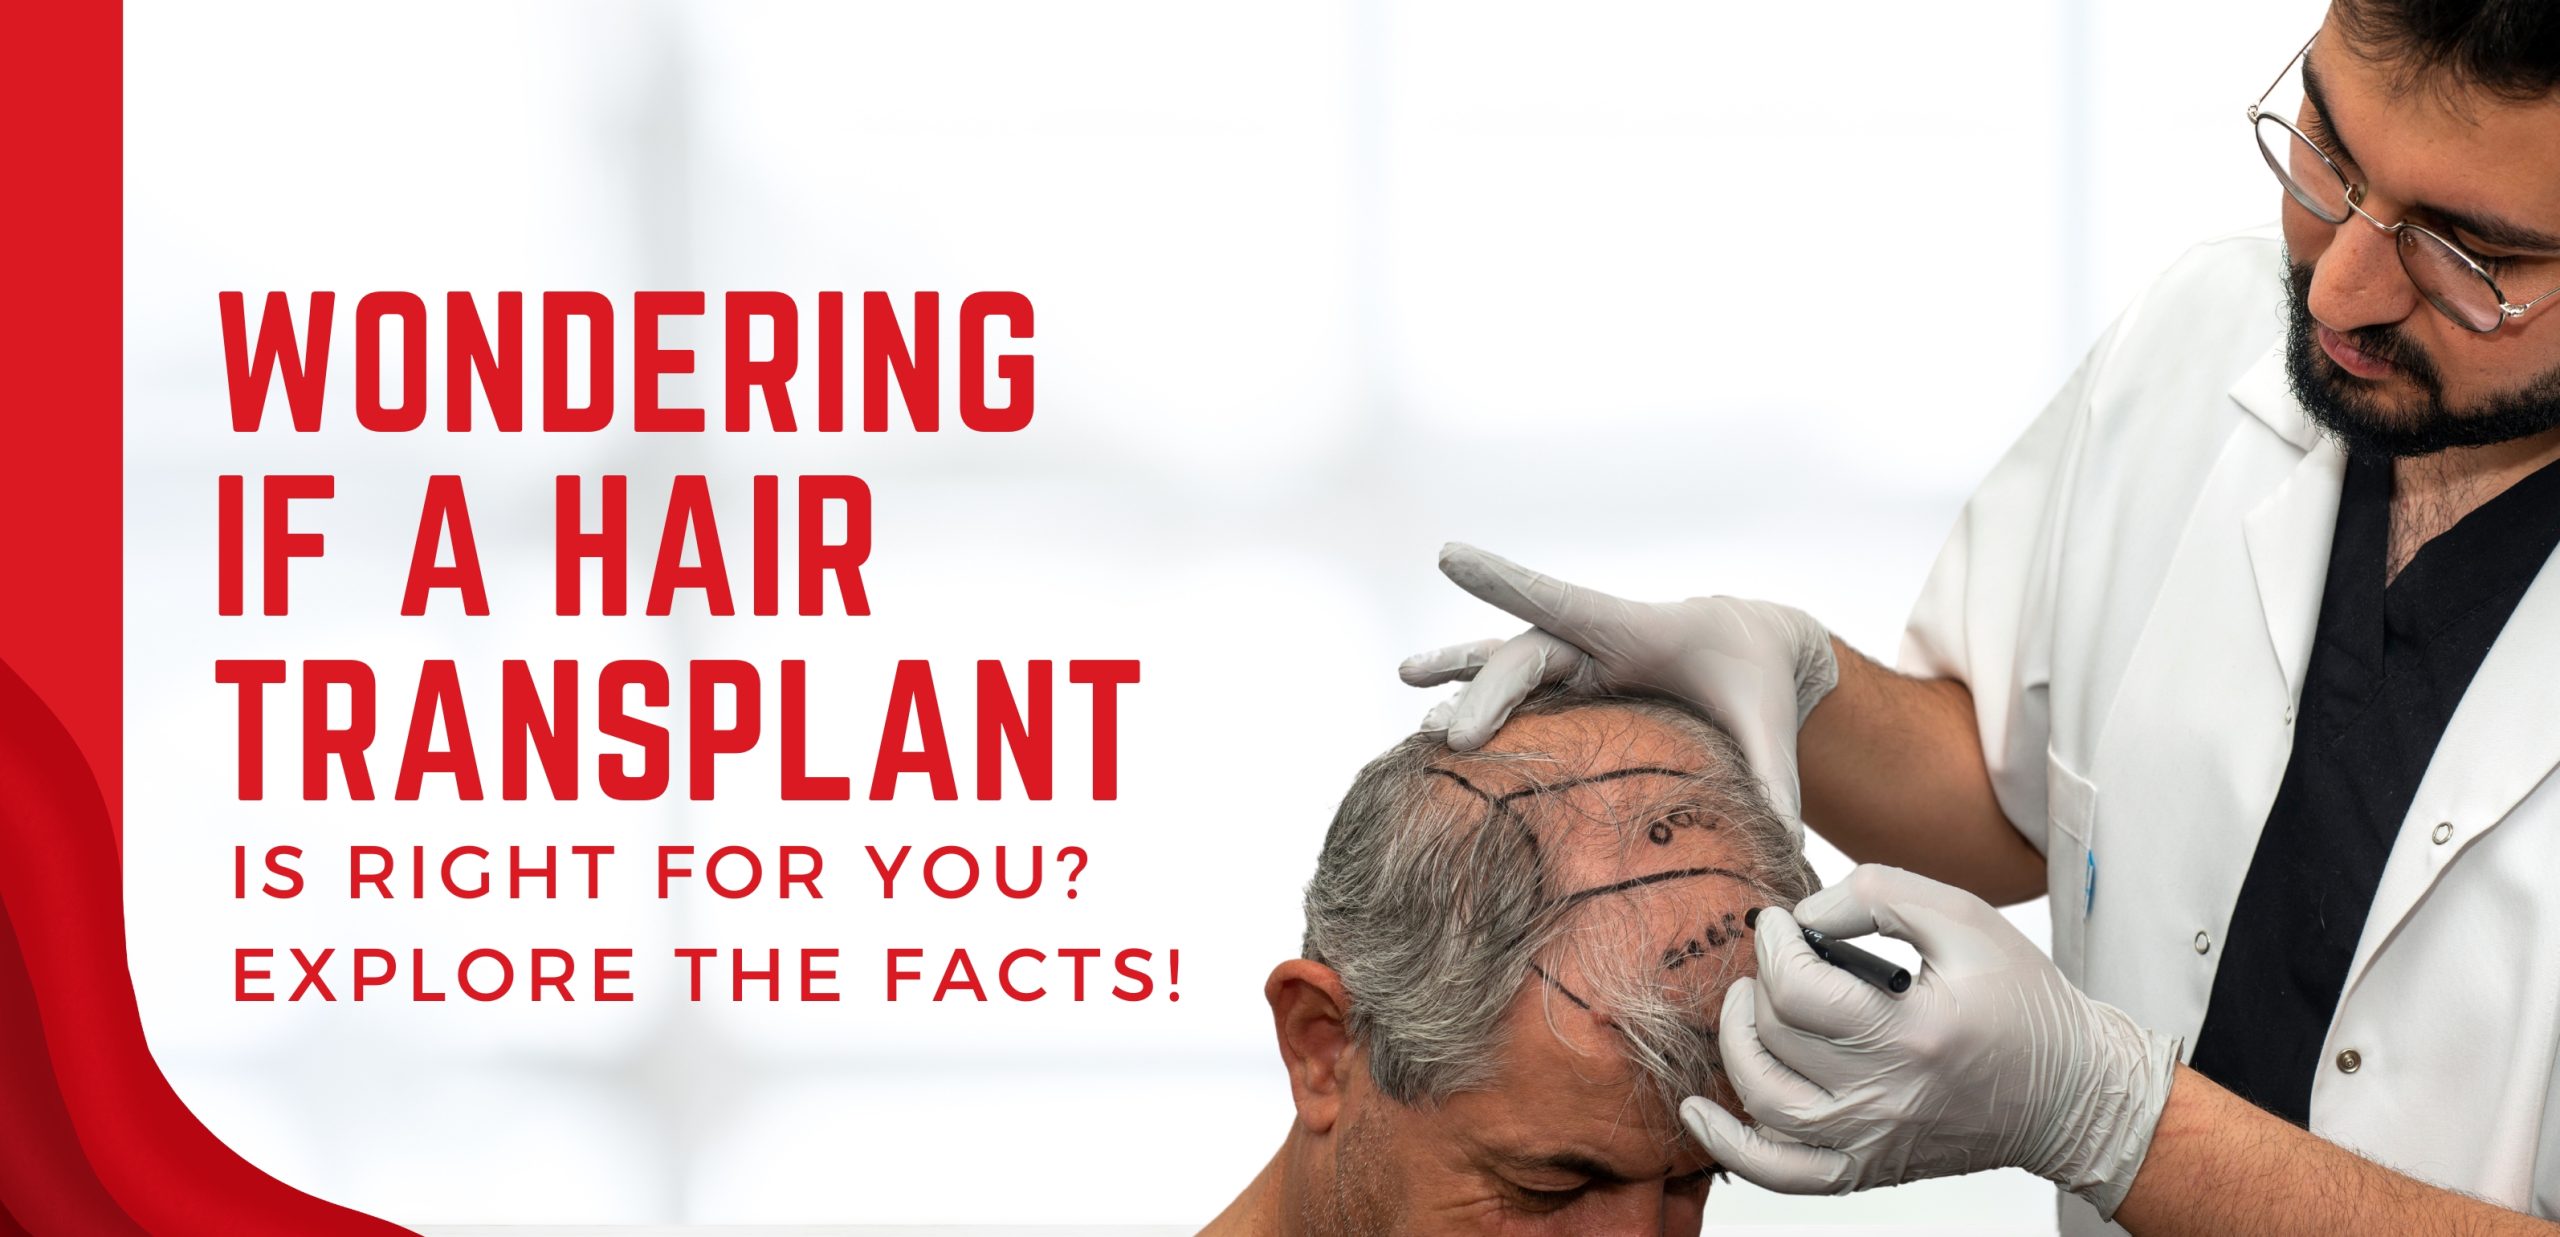 Wondering if a Hair Transplant is Right for You? Explore the Facts!